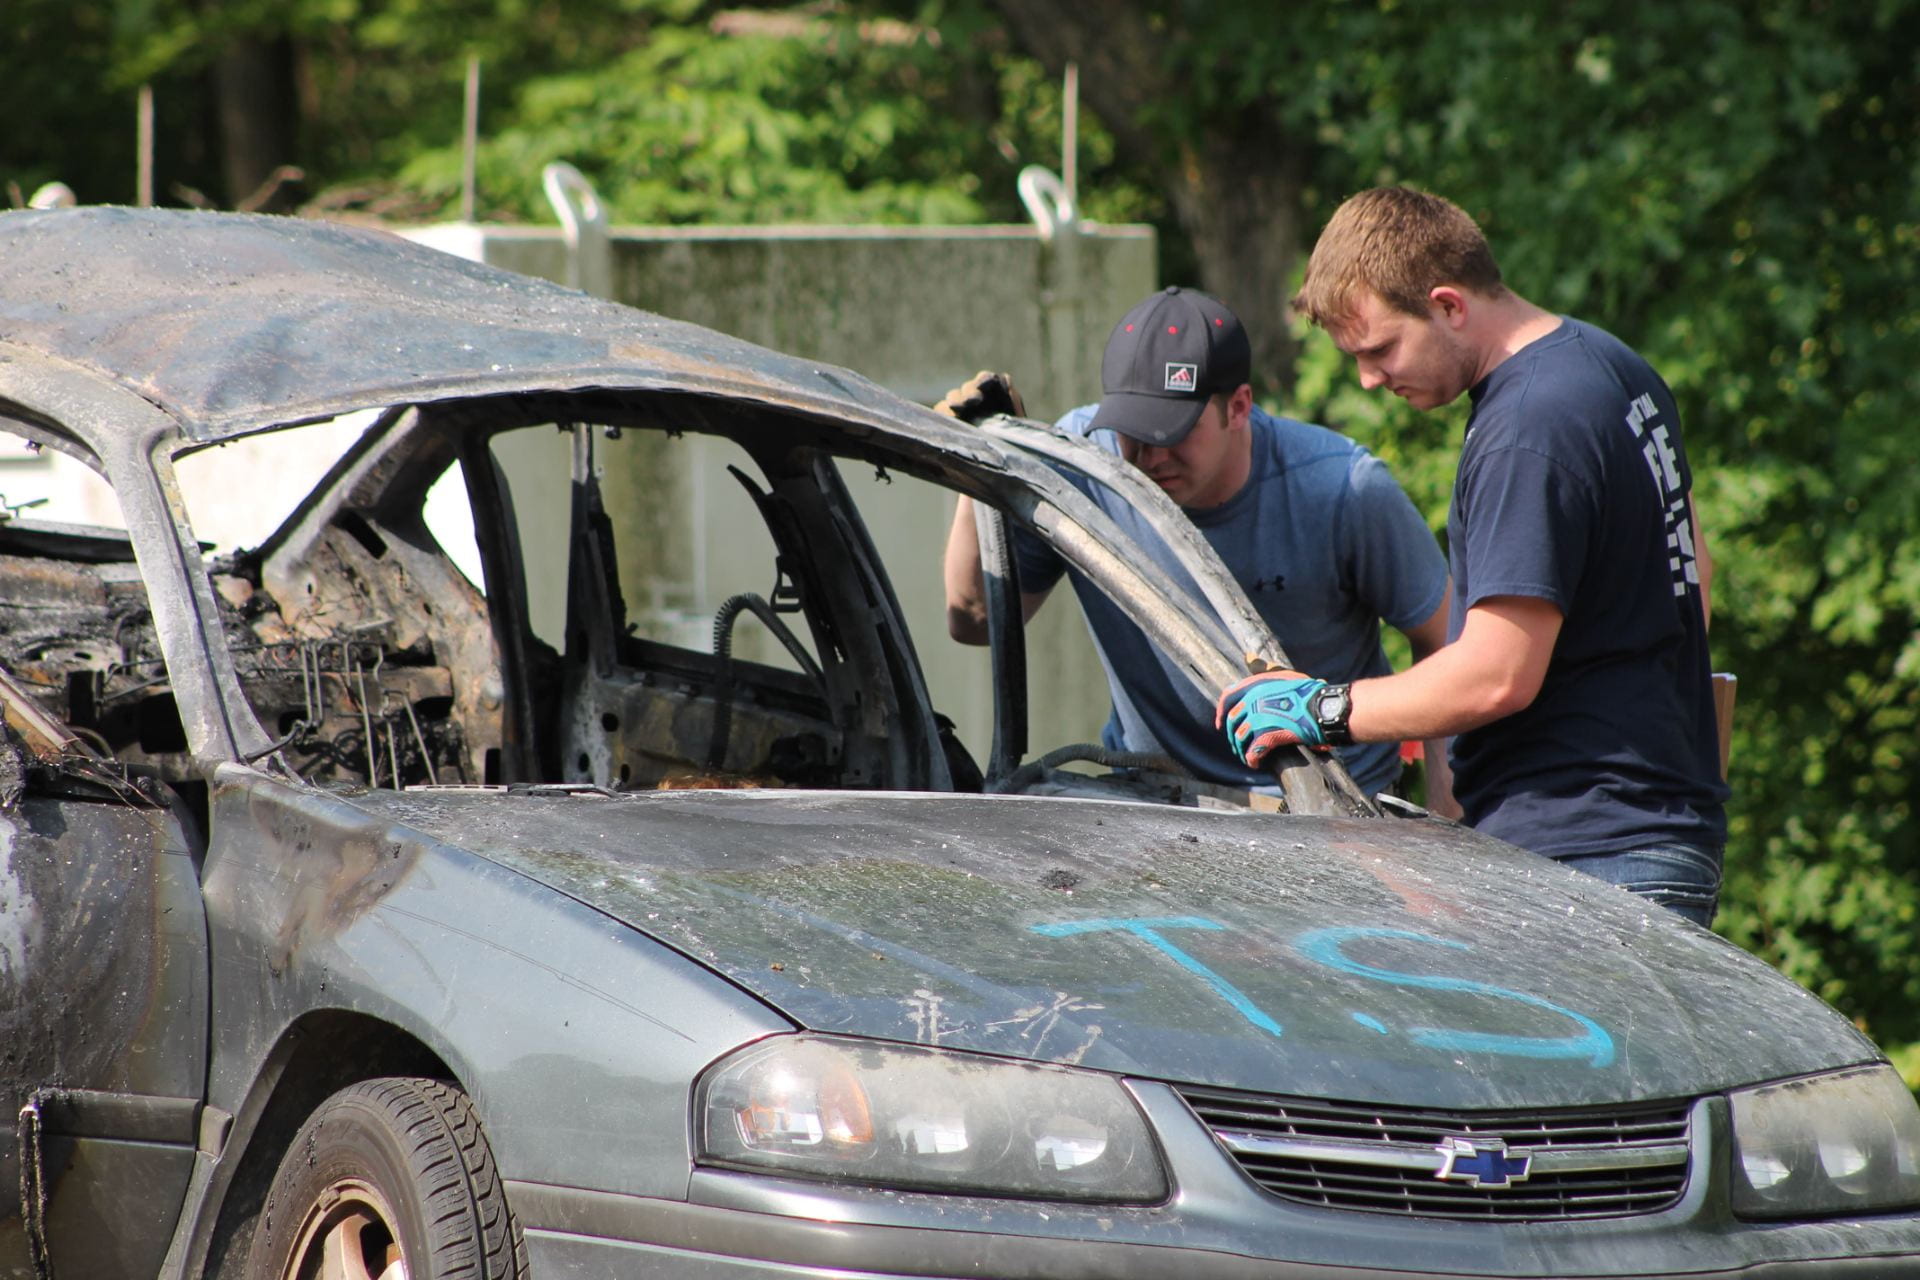 Two students stand beside the burned out remains of a car that had a bomb explode inside of it.